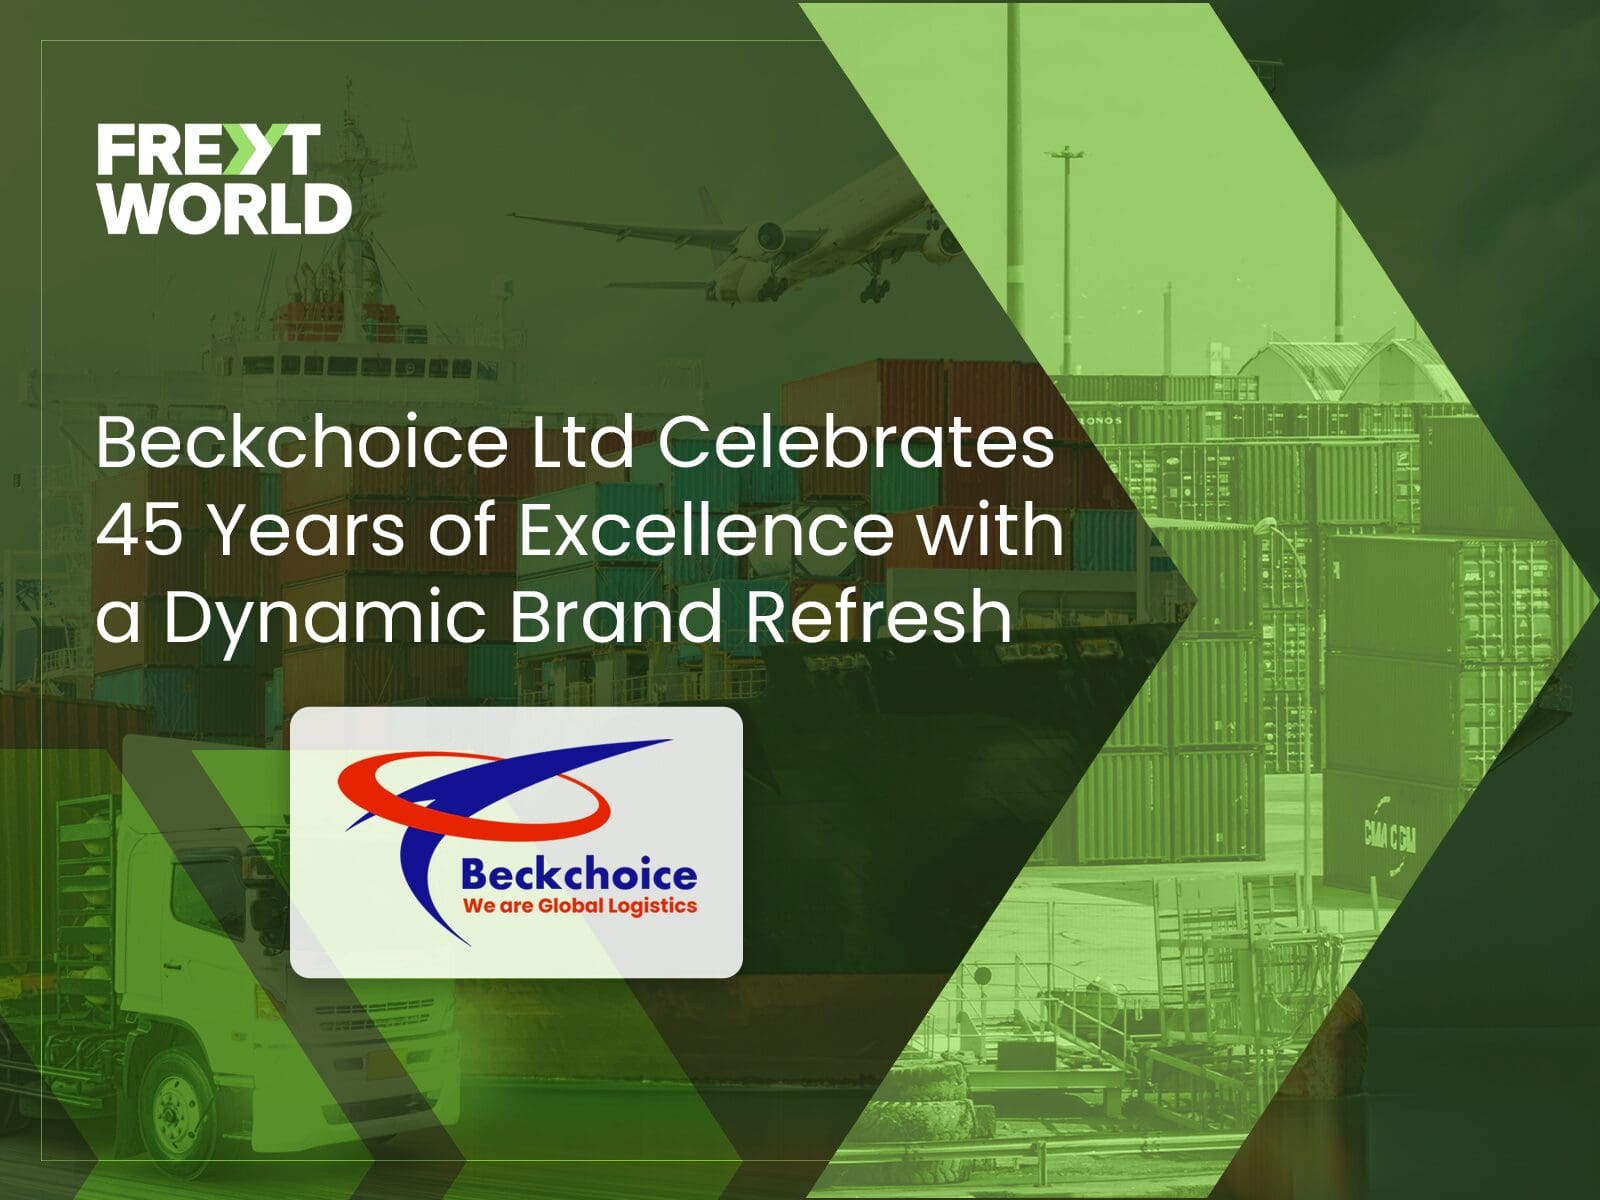 Beckchoice Ltd Celebrates 45 Years of Excellence with a Dynamic Brand Refresh